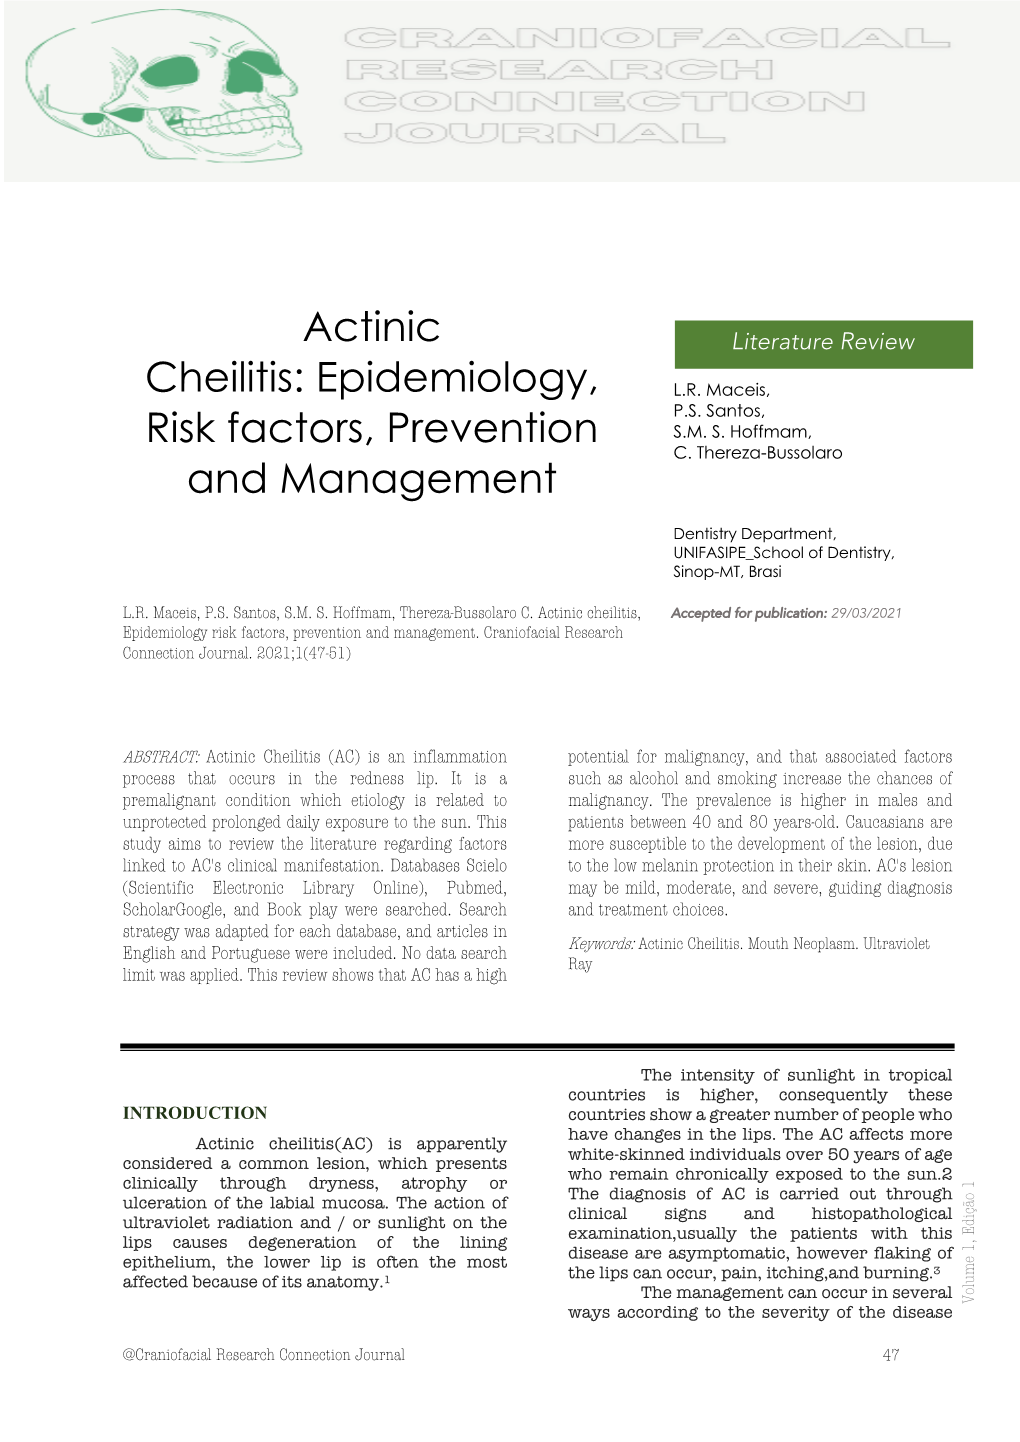 Actinic Cheilitis (AC) Is an Inflammation Inflammation an Is (AC) Cheilitis Actinic